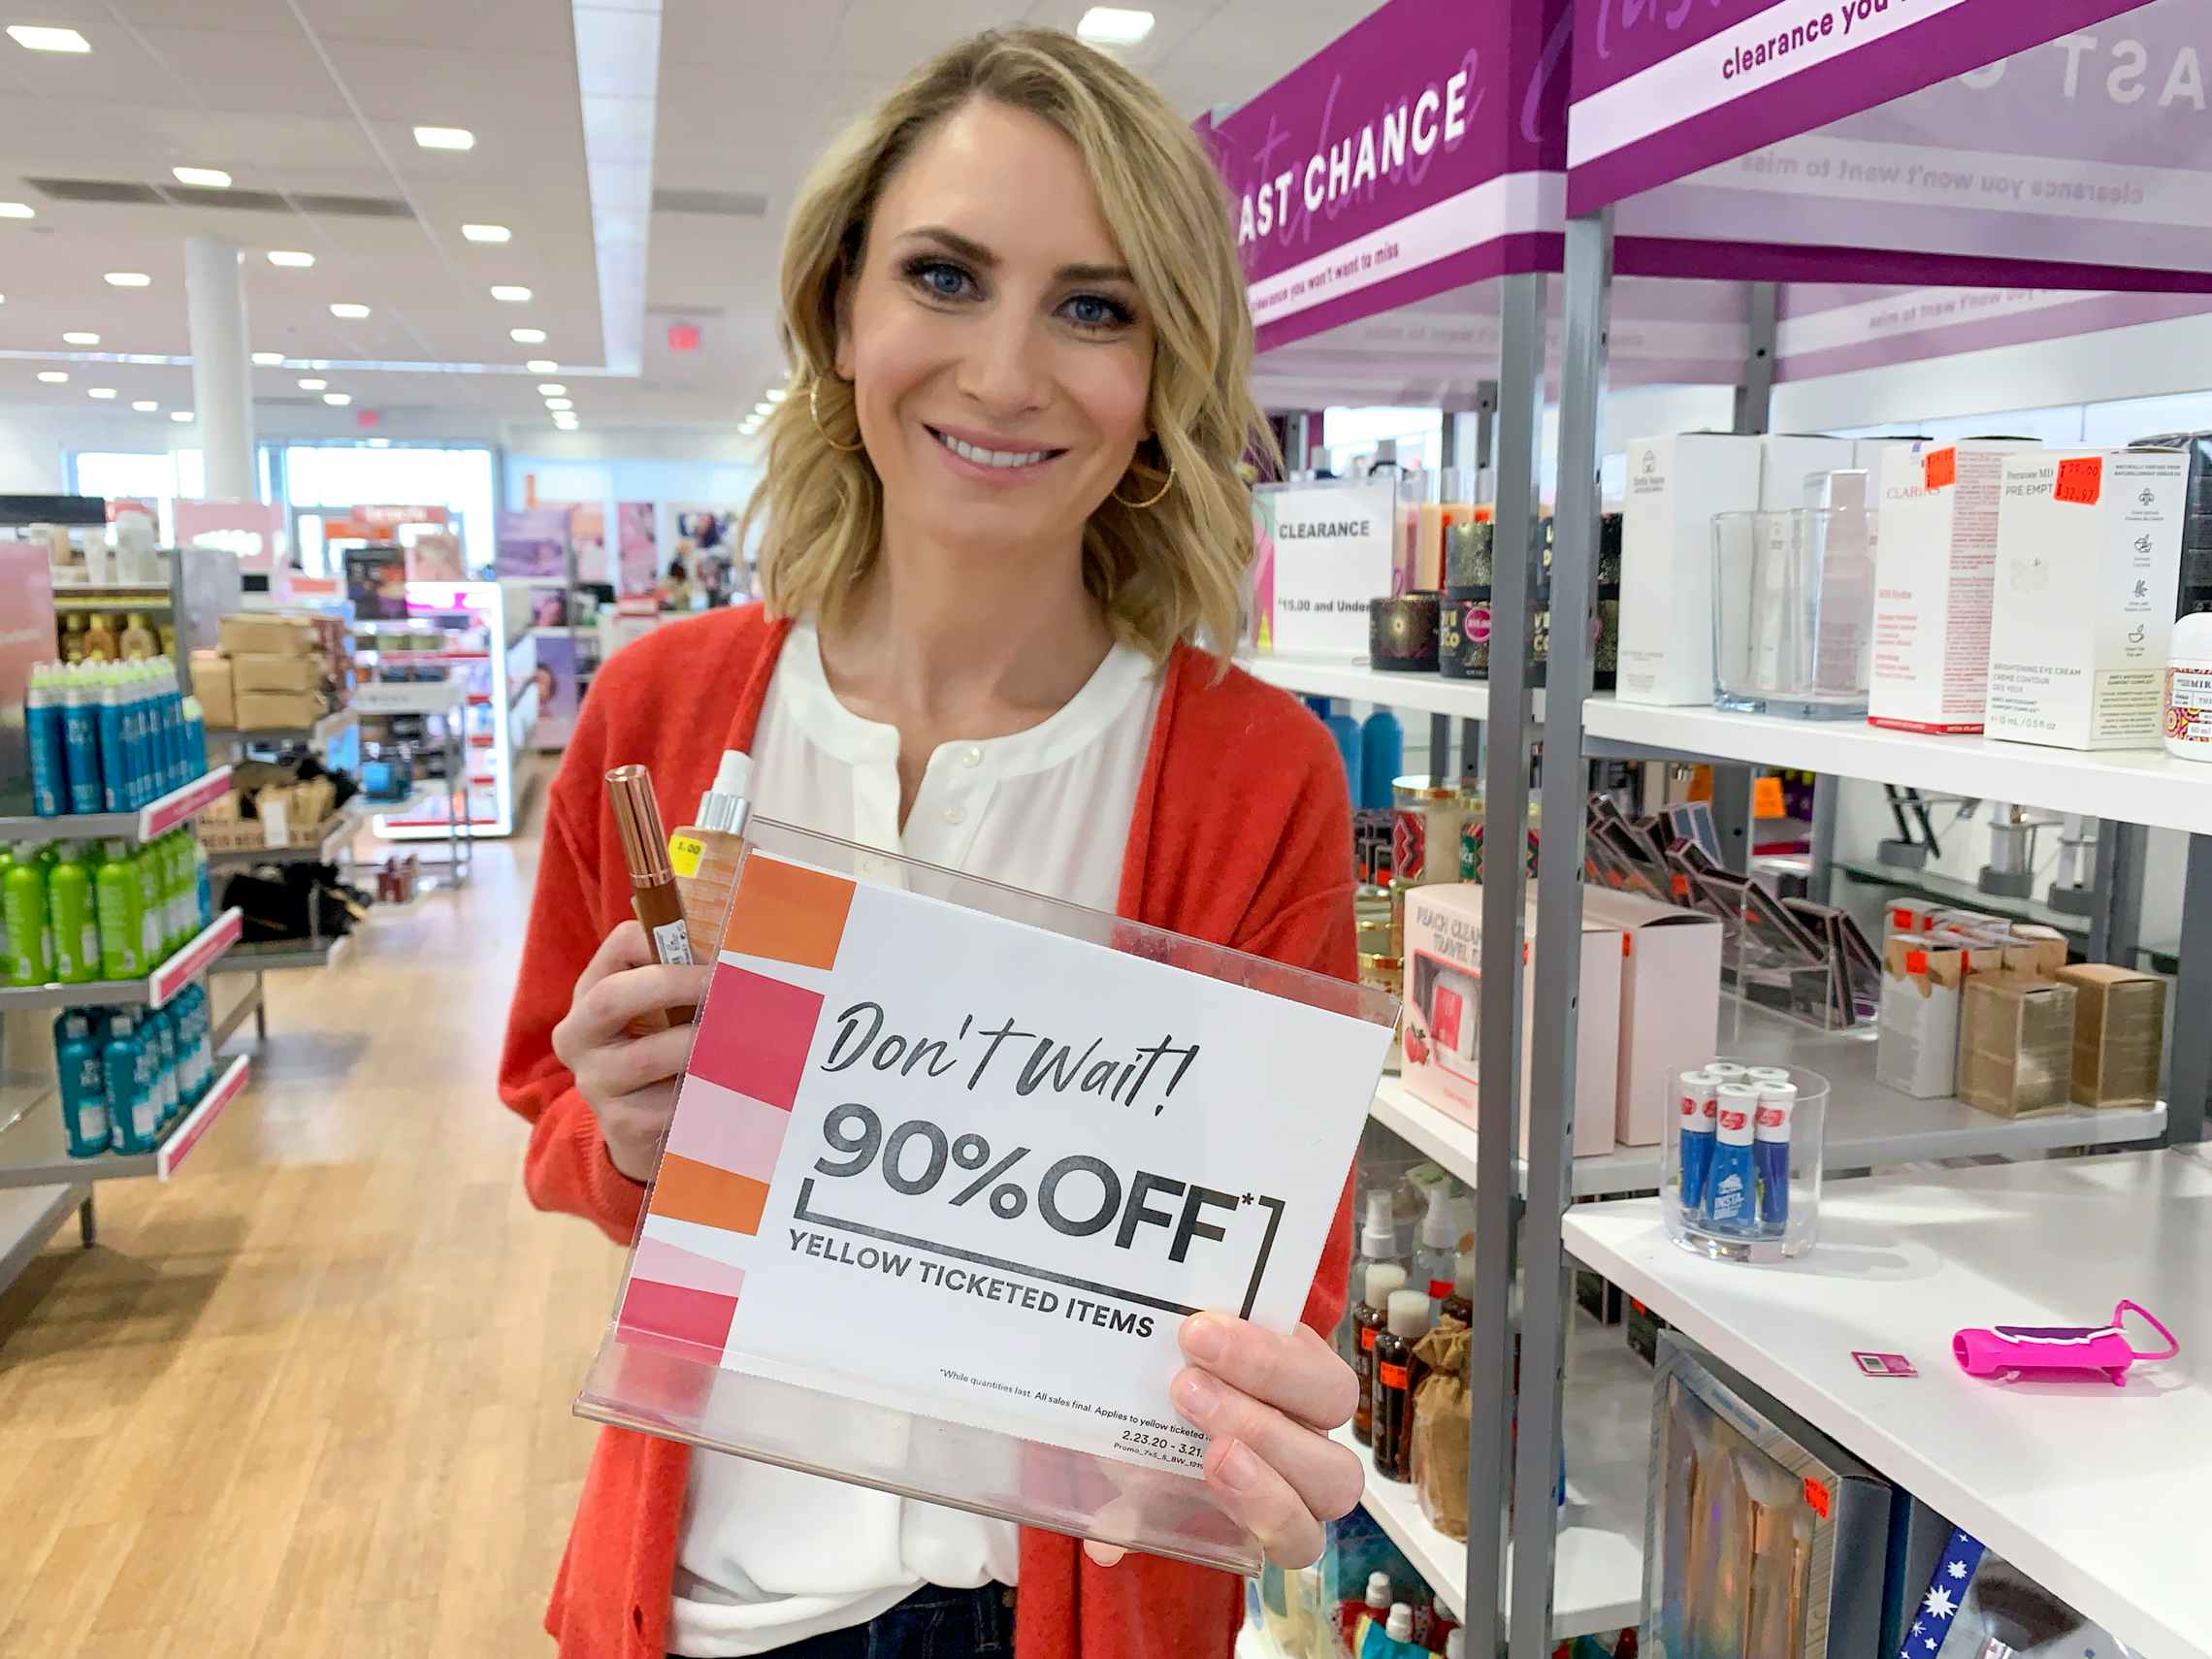 A woman holding up a sign in front of a clearance shelf that says "Don't Wait! 90% Off